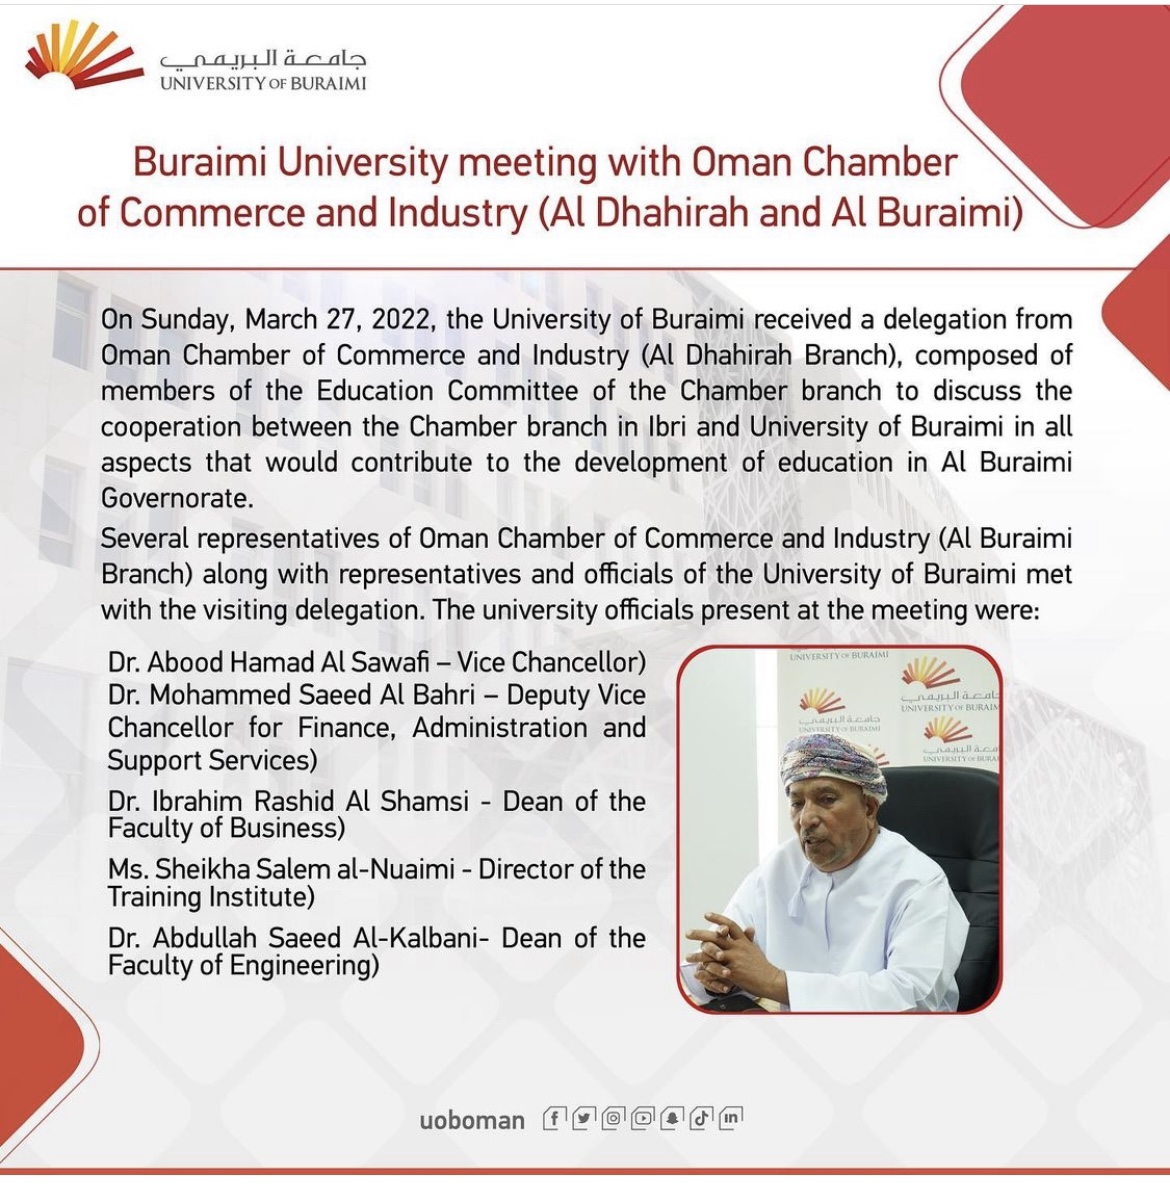 Buraimi University meeting with Oman Chamber of Commerce and Industry (Al Dhahirah and Al Buraimi)